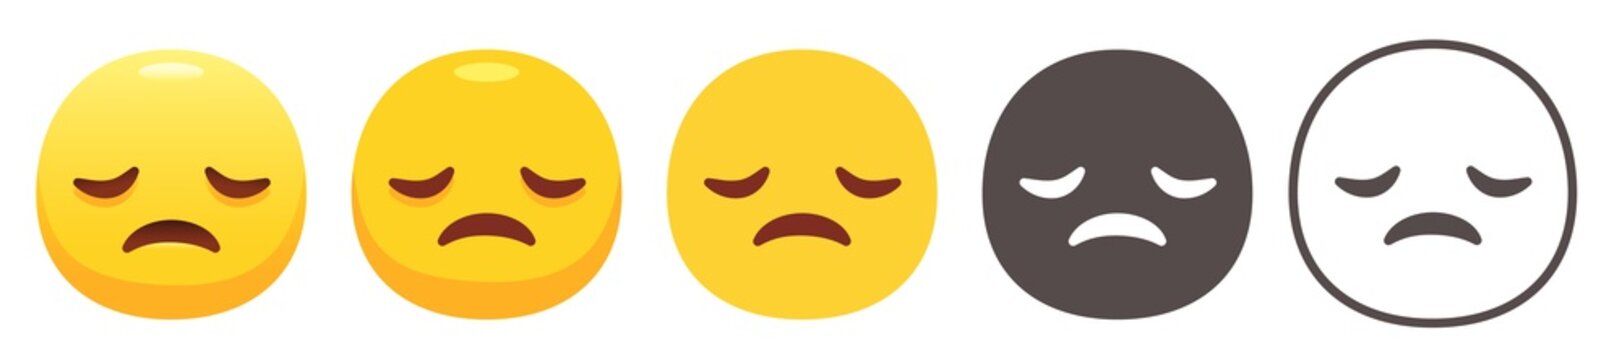 Disappointed emoji. Frowny yellow face with closed eyes and sad smile. Unhappy emoticon flat vector icon set